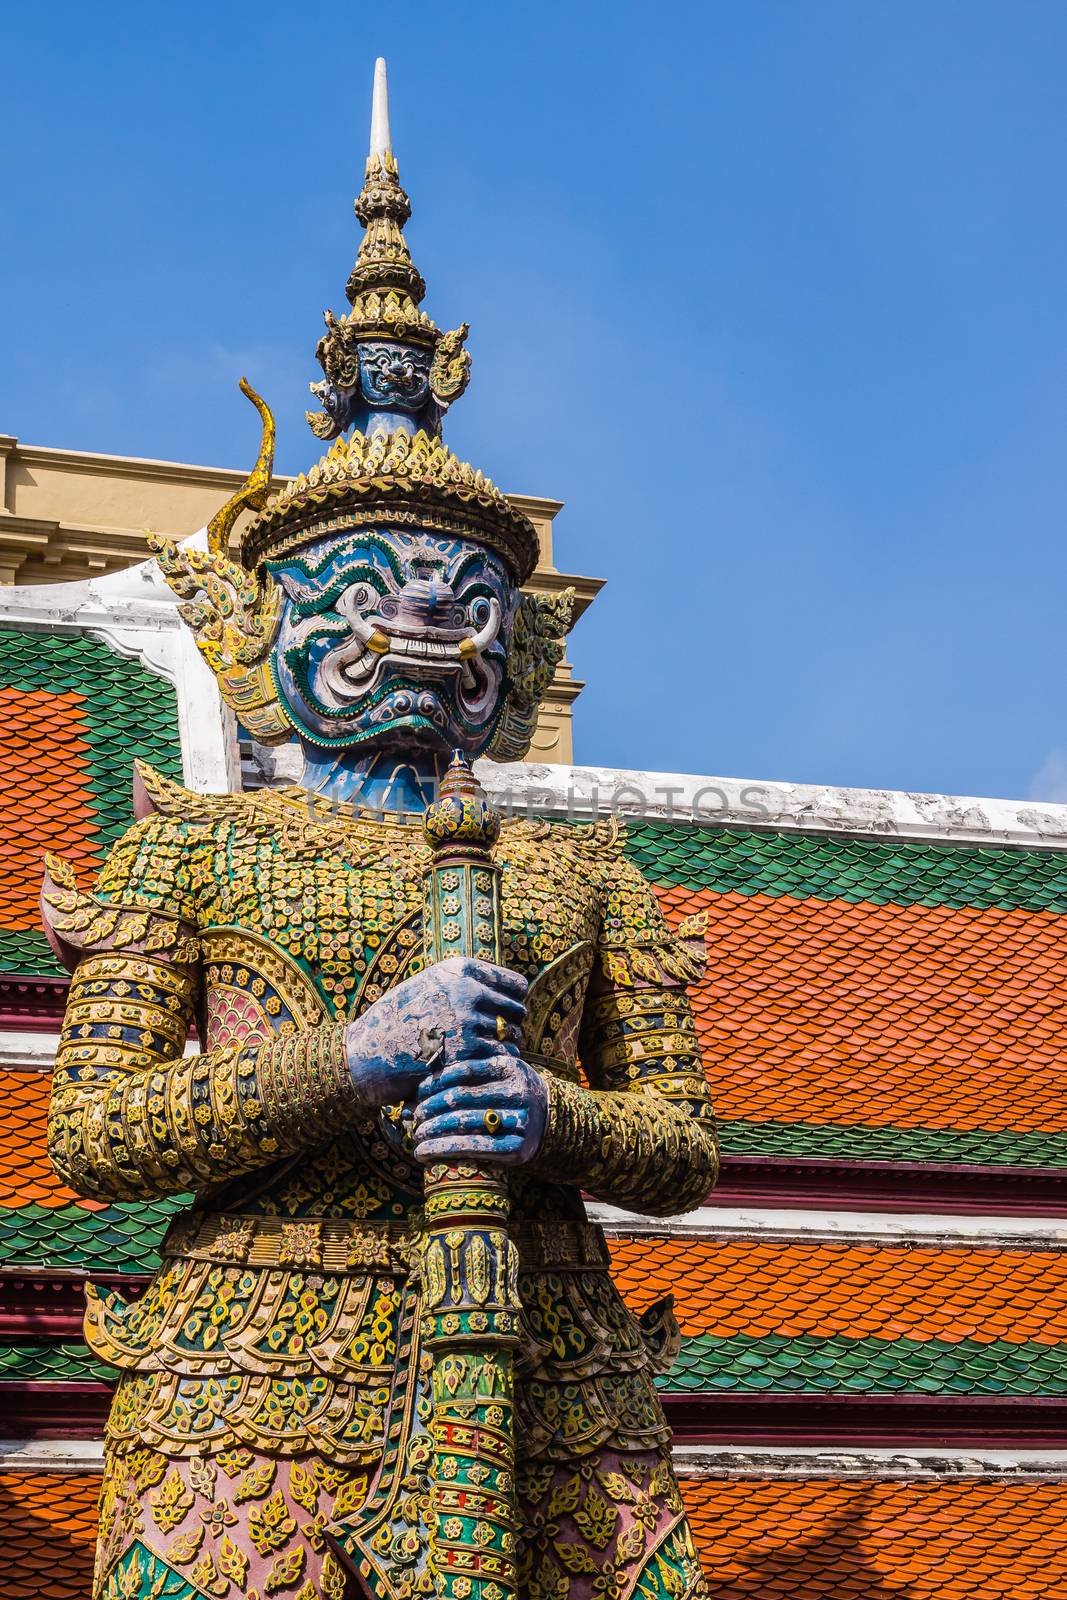 Giant guardian demon statue at The Grand Palace complex in Bangkok, Thailand.